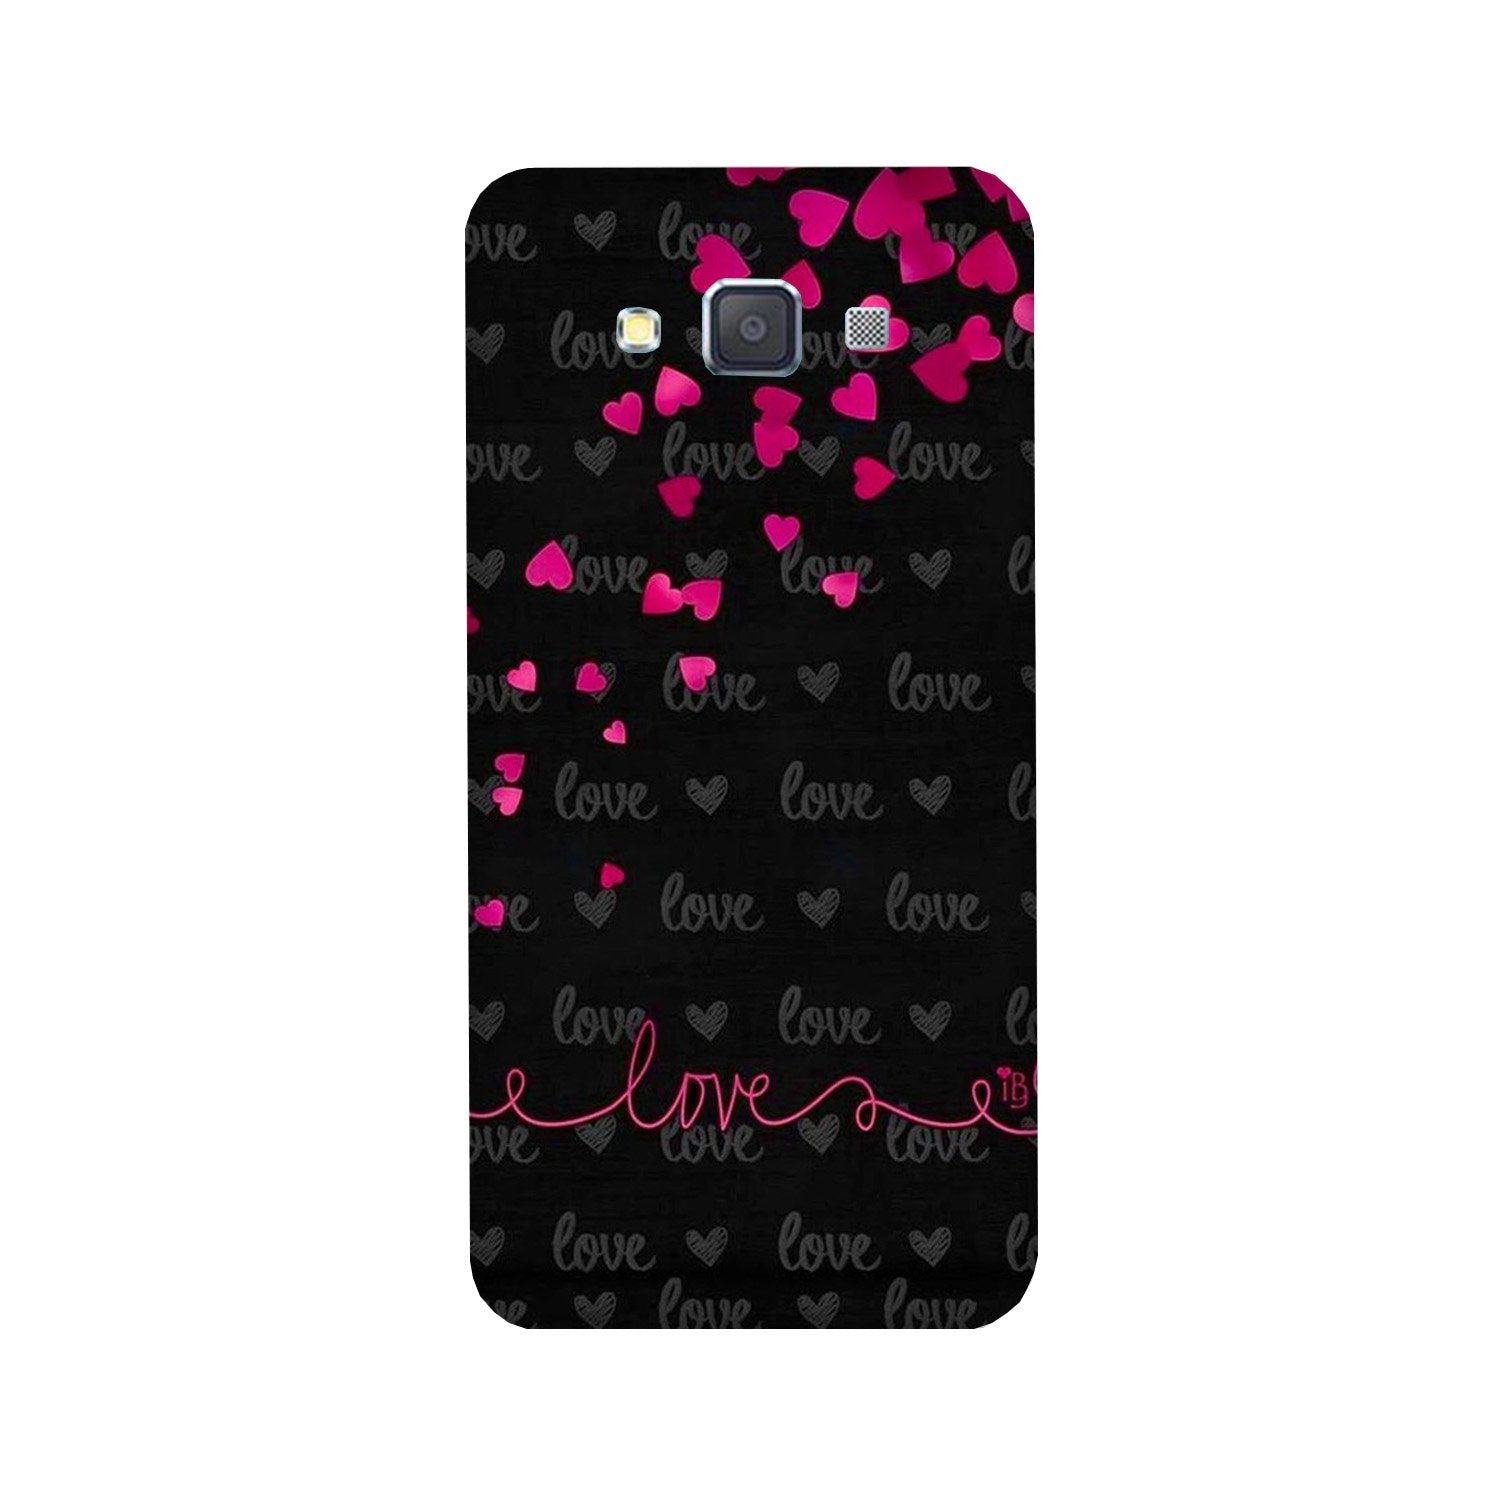 Love in Air Case for Galaxy J5 (2016)